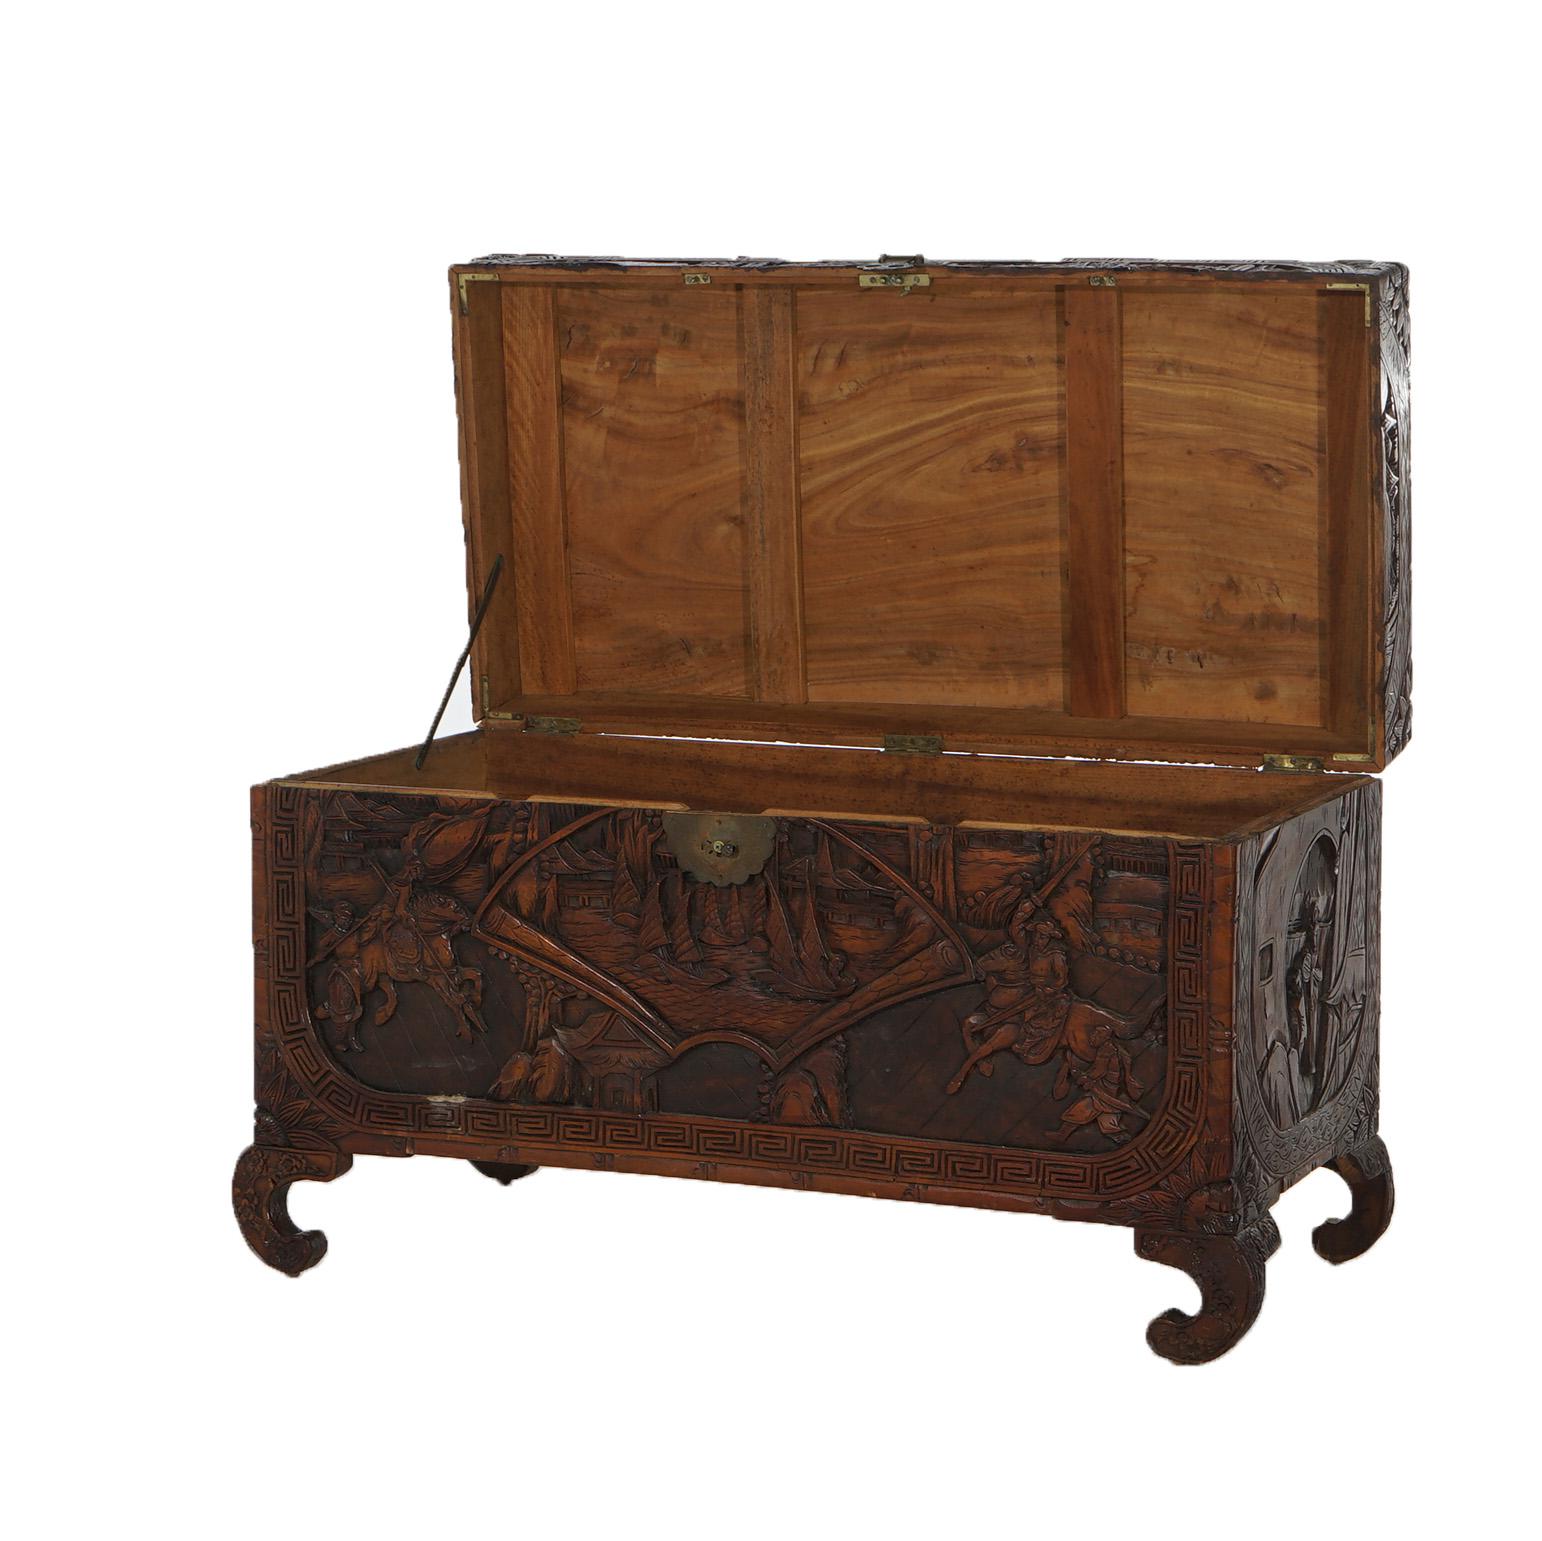 Antique Chinese Carved Hardwood Chest with Figures & Scenes in Relief C1920 For Sale 5